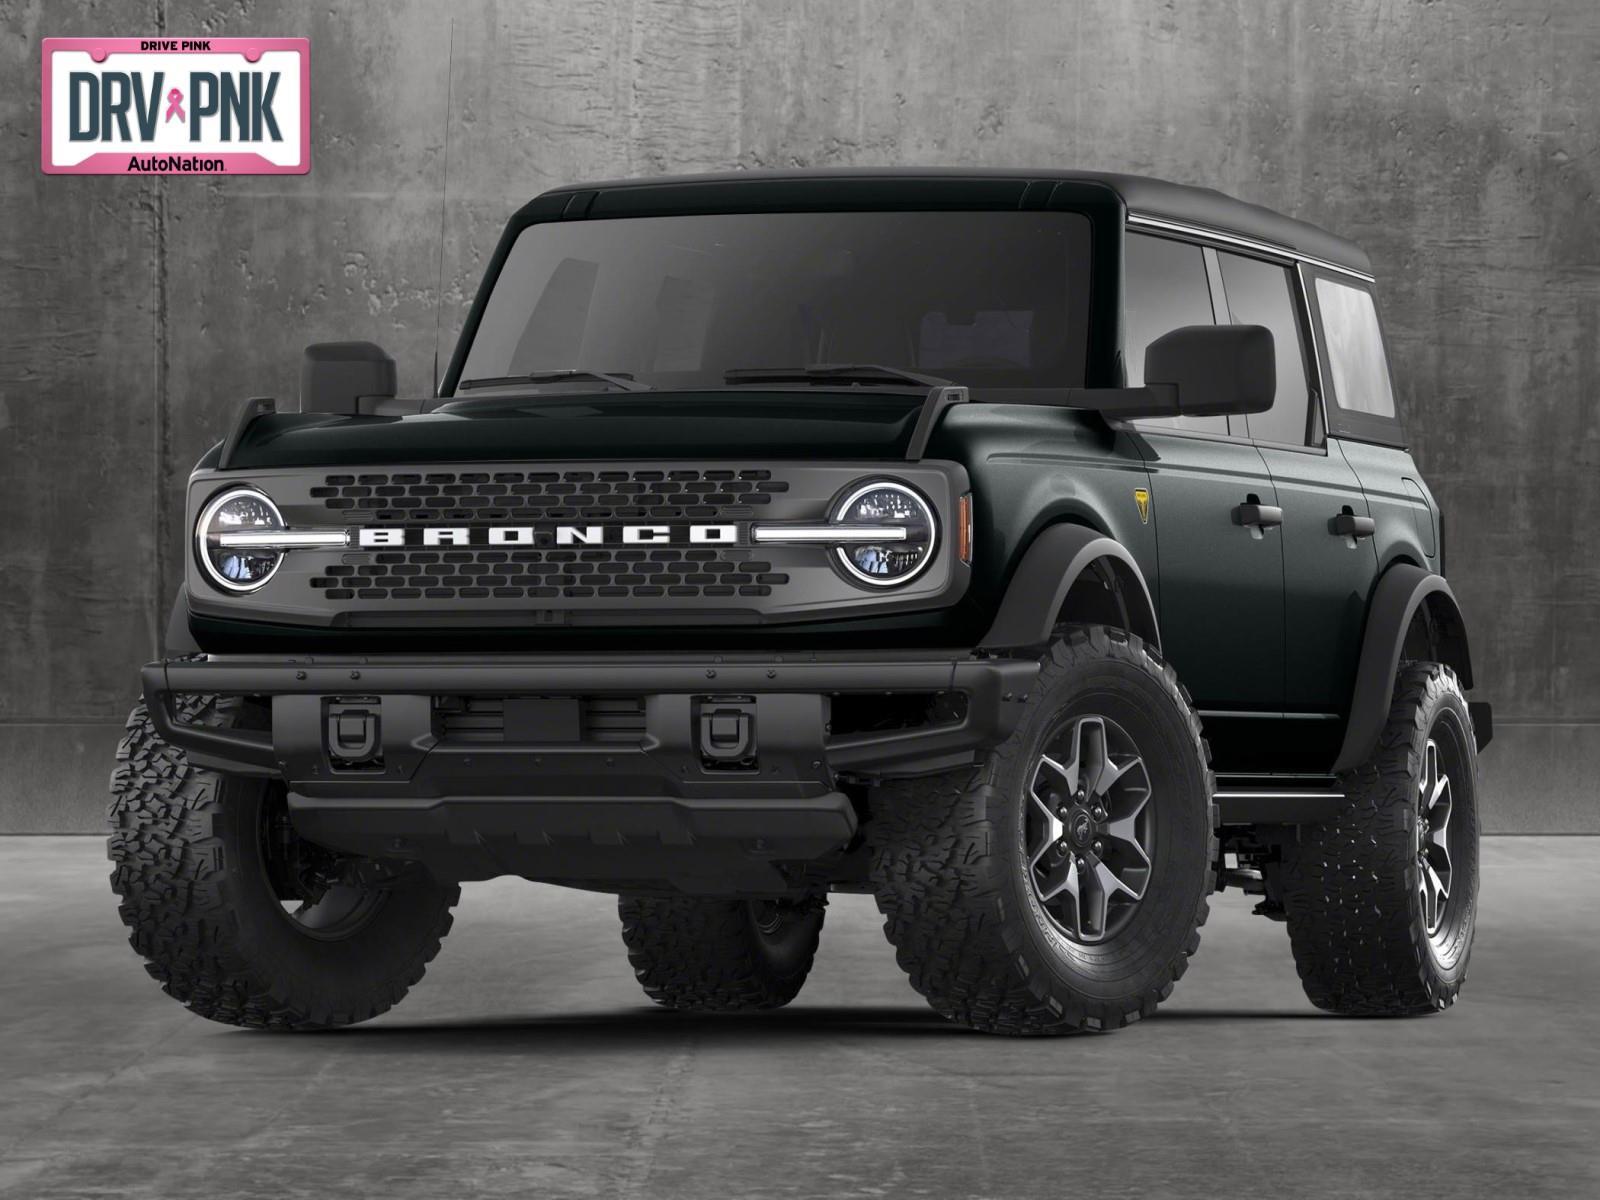 Hot Pink Ford Bronco Badlands May Preview Upcoming Color